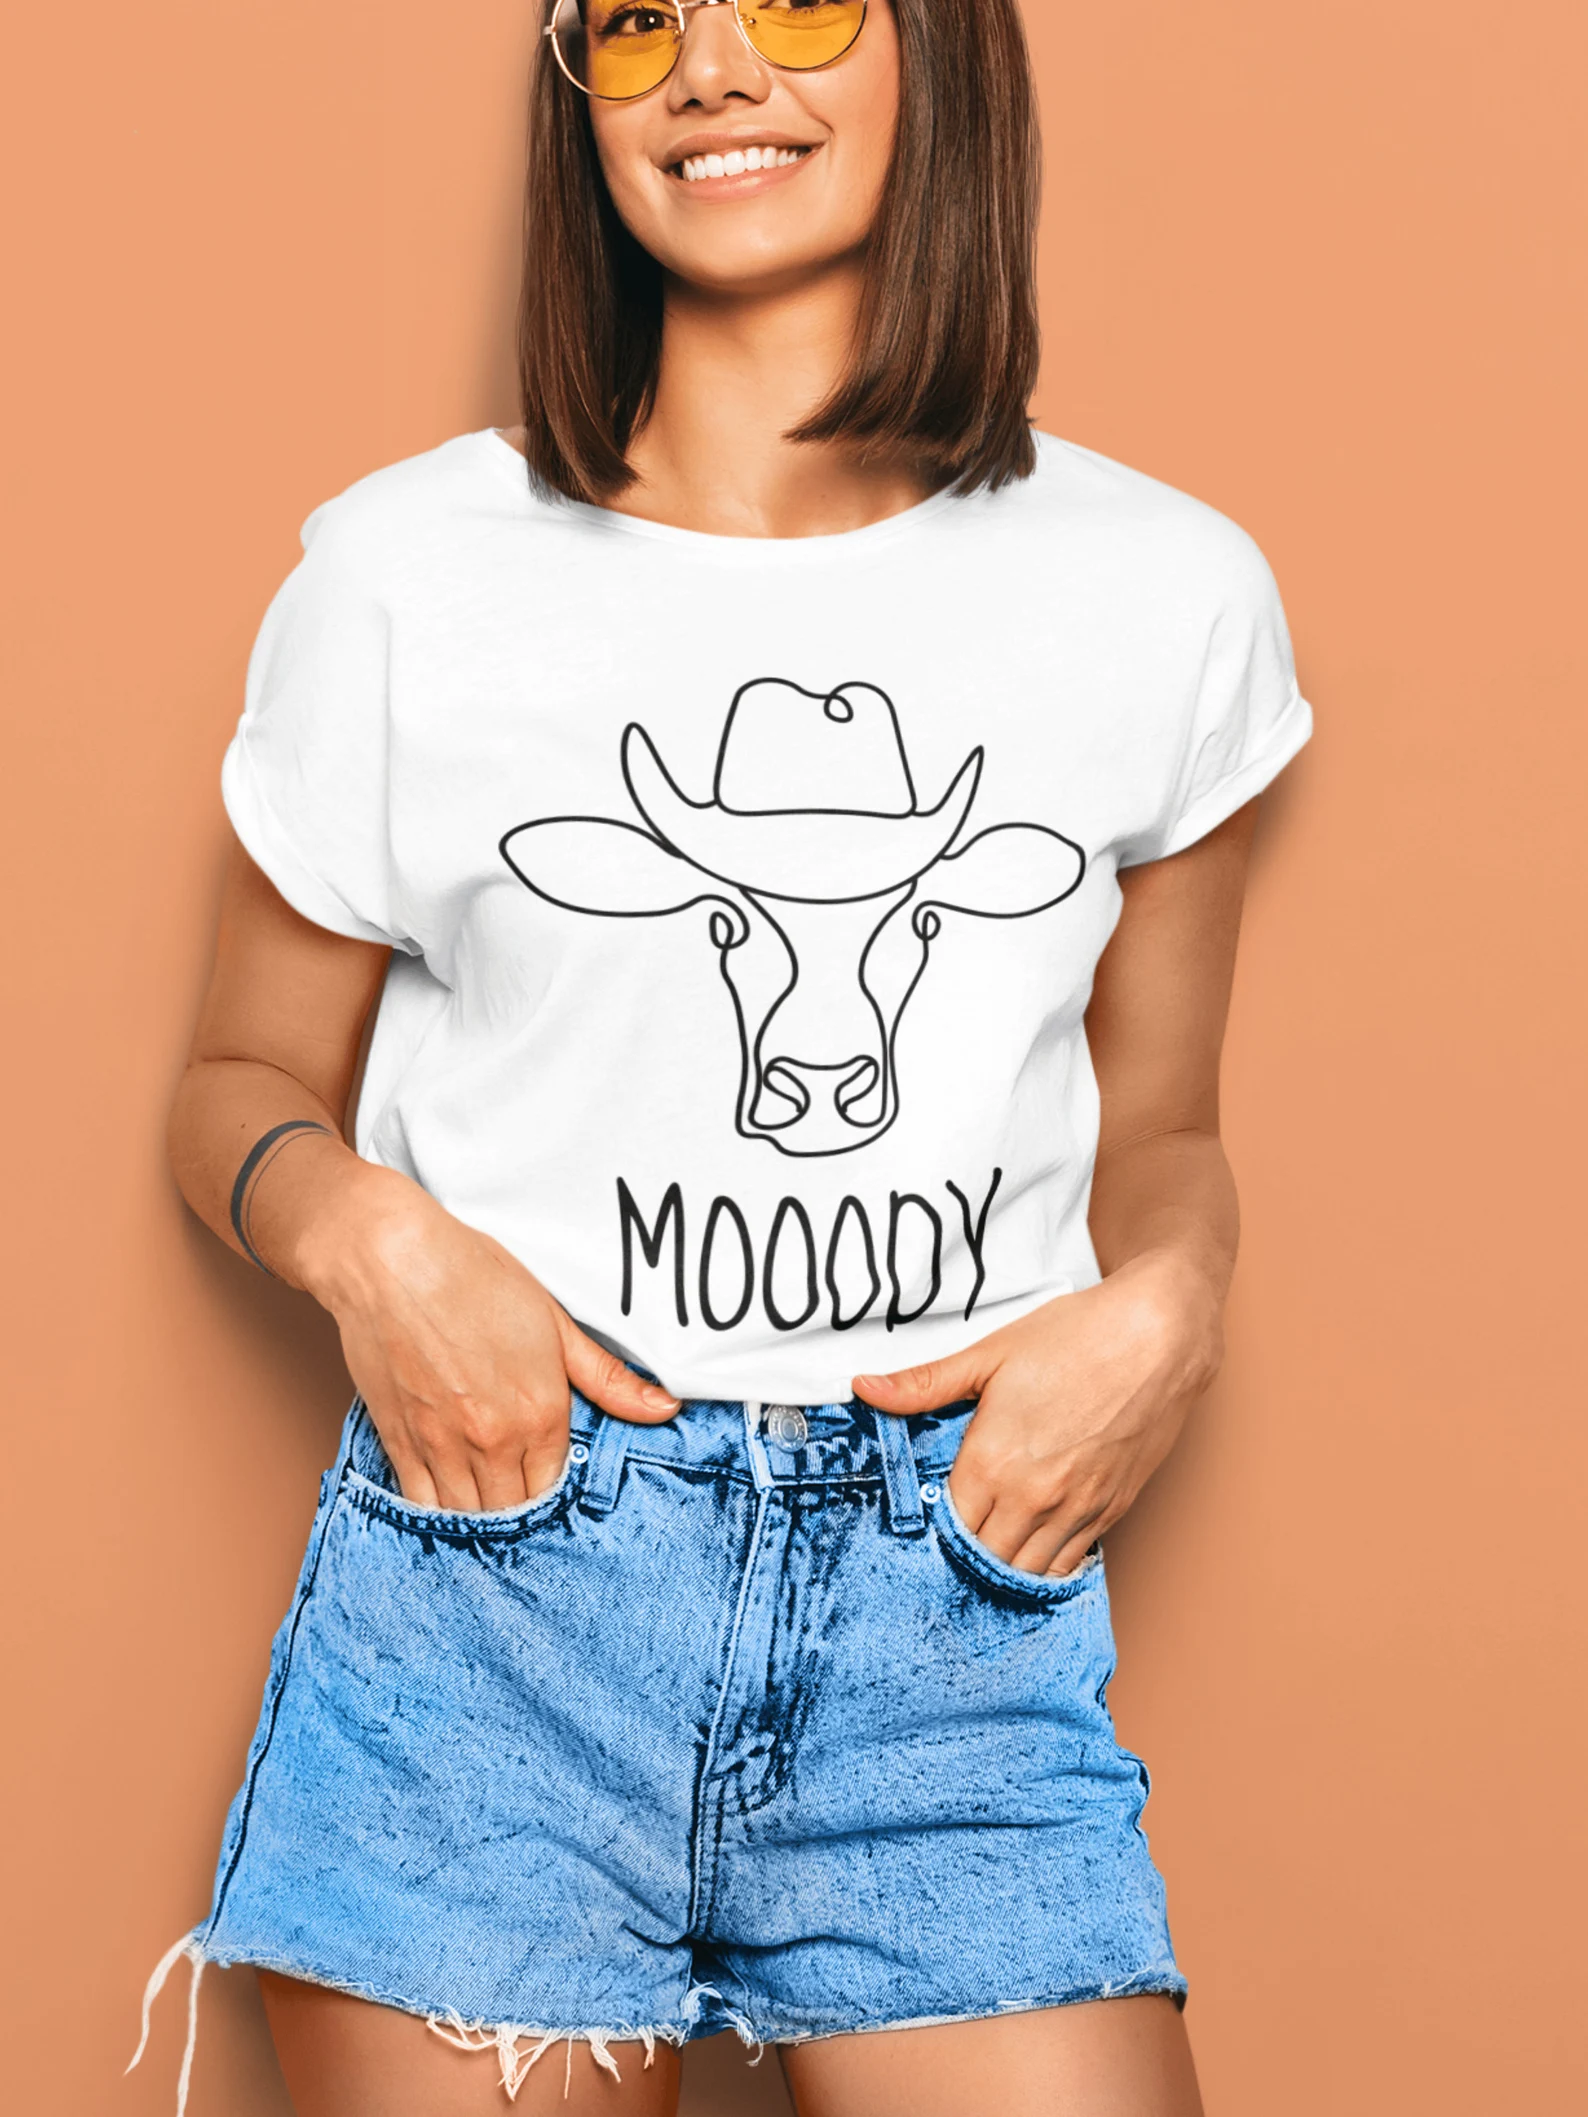 Simple white t-shirt with an outline cow.